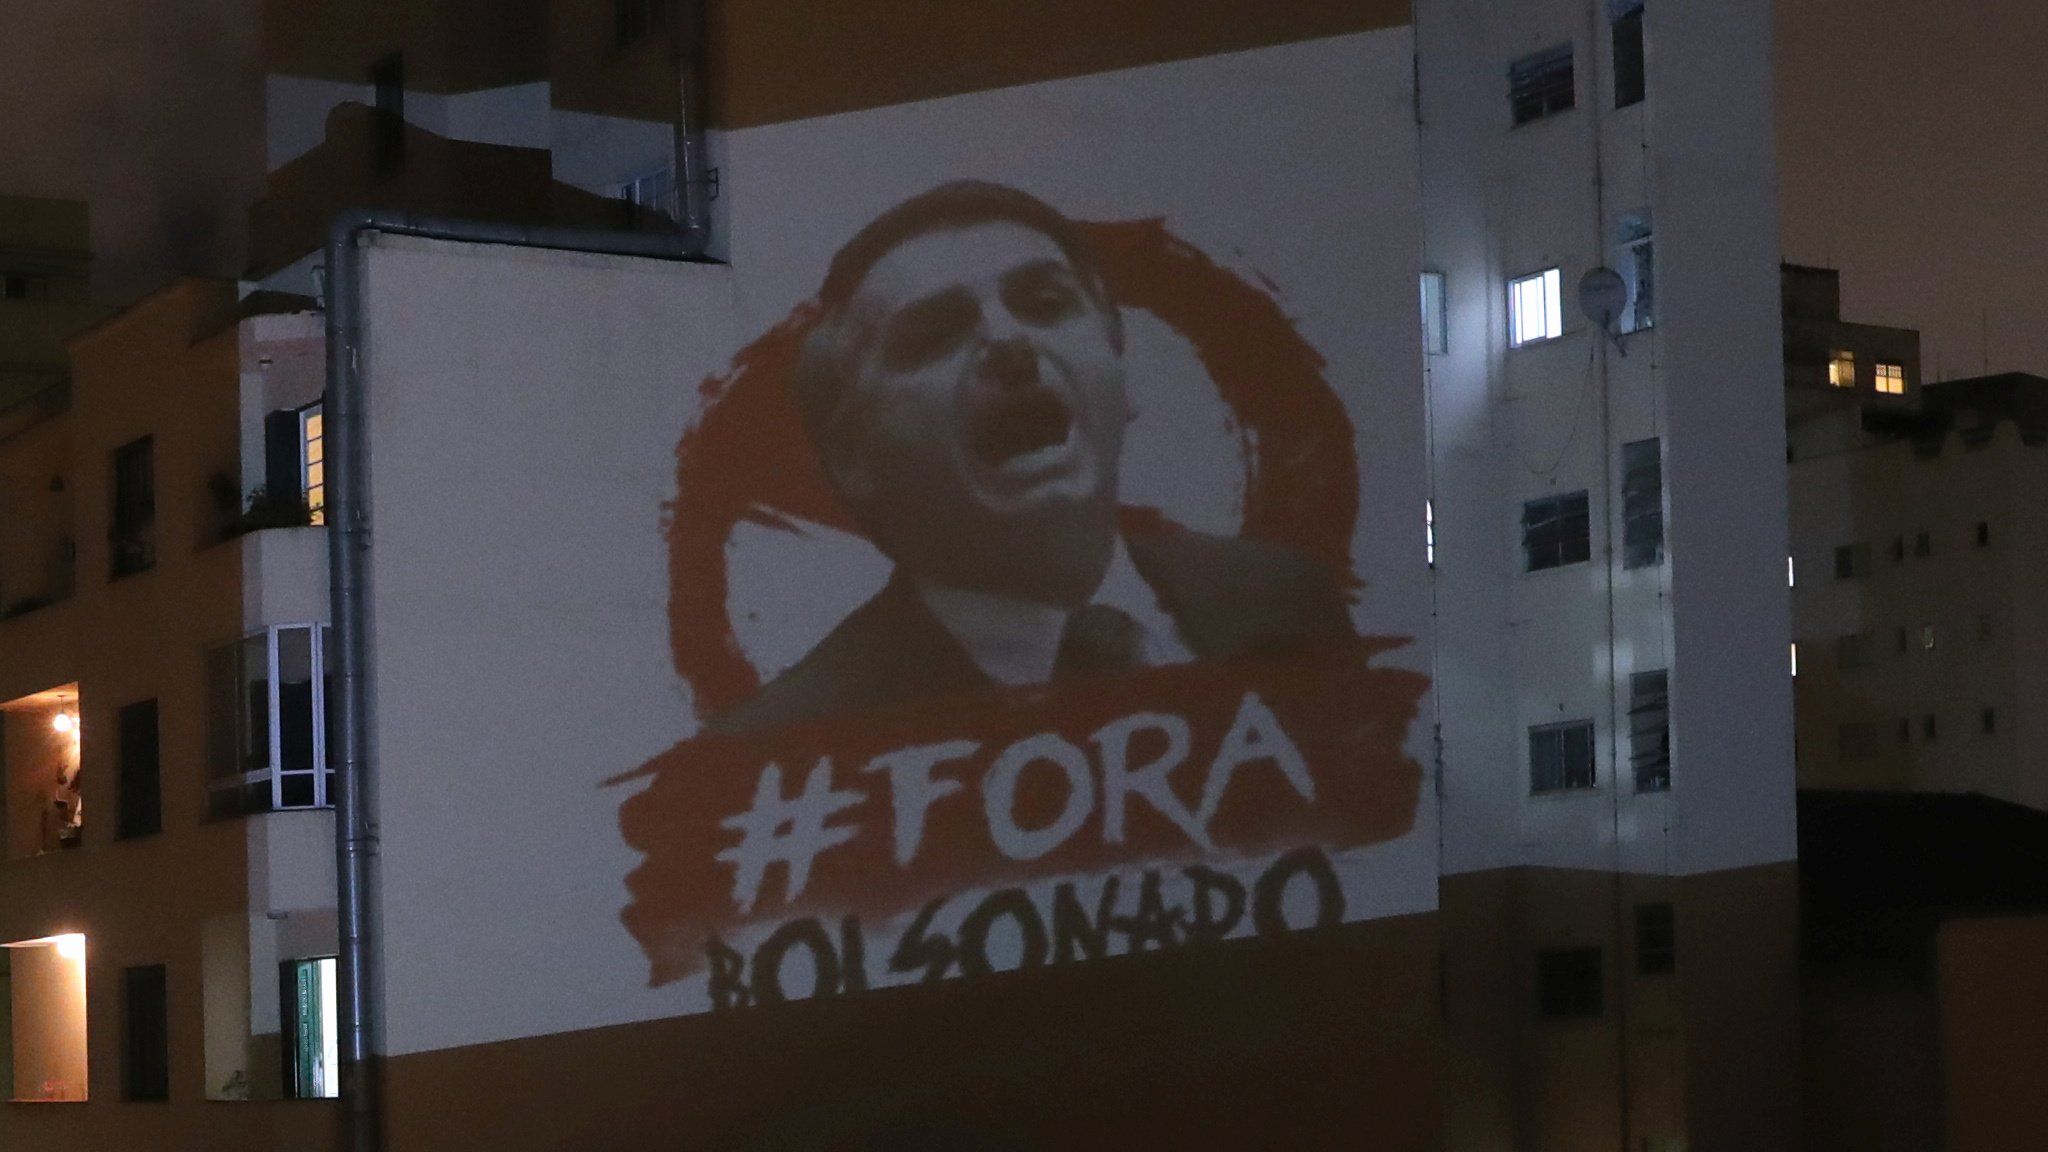 An image depicting Brazil's President Jair Bolsonaro and the phrase "Out Bolsonaro" projected onto a building in Sao Paulo (25 March 2020)